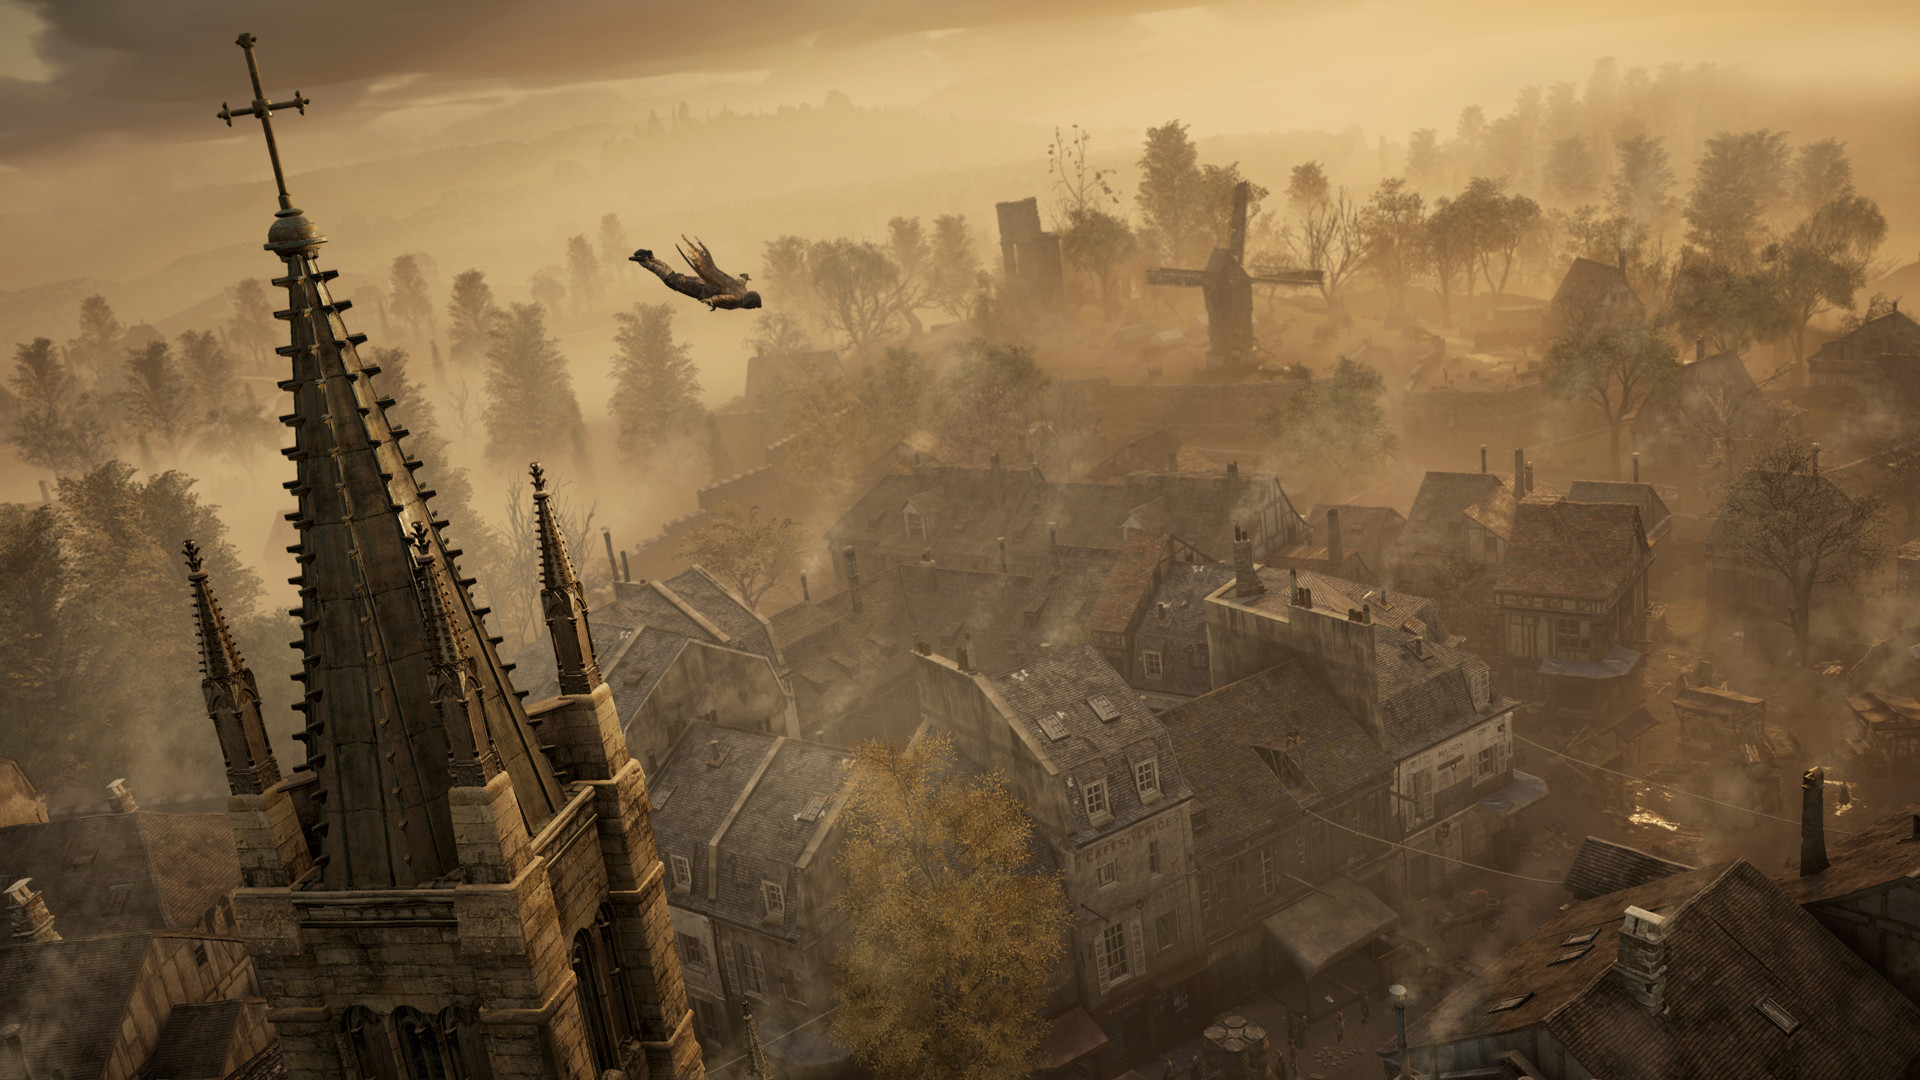 1920x1080 Grim looking Assassin's Creed Unity: Dead Kings DLC Screenshots and Concept  Art Revealed